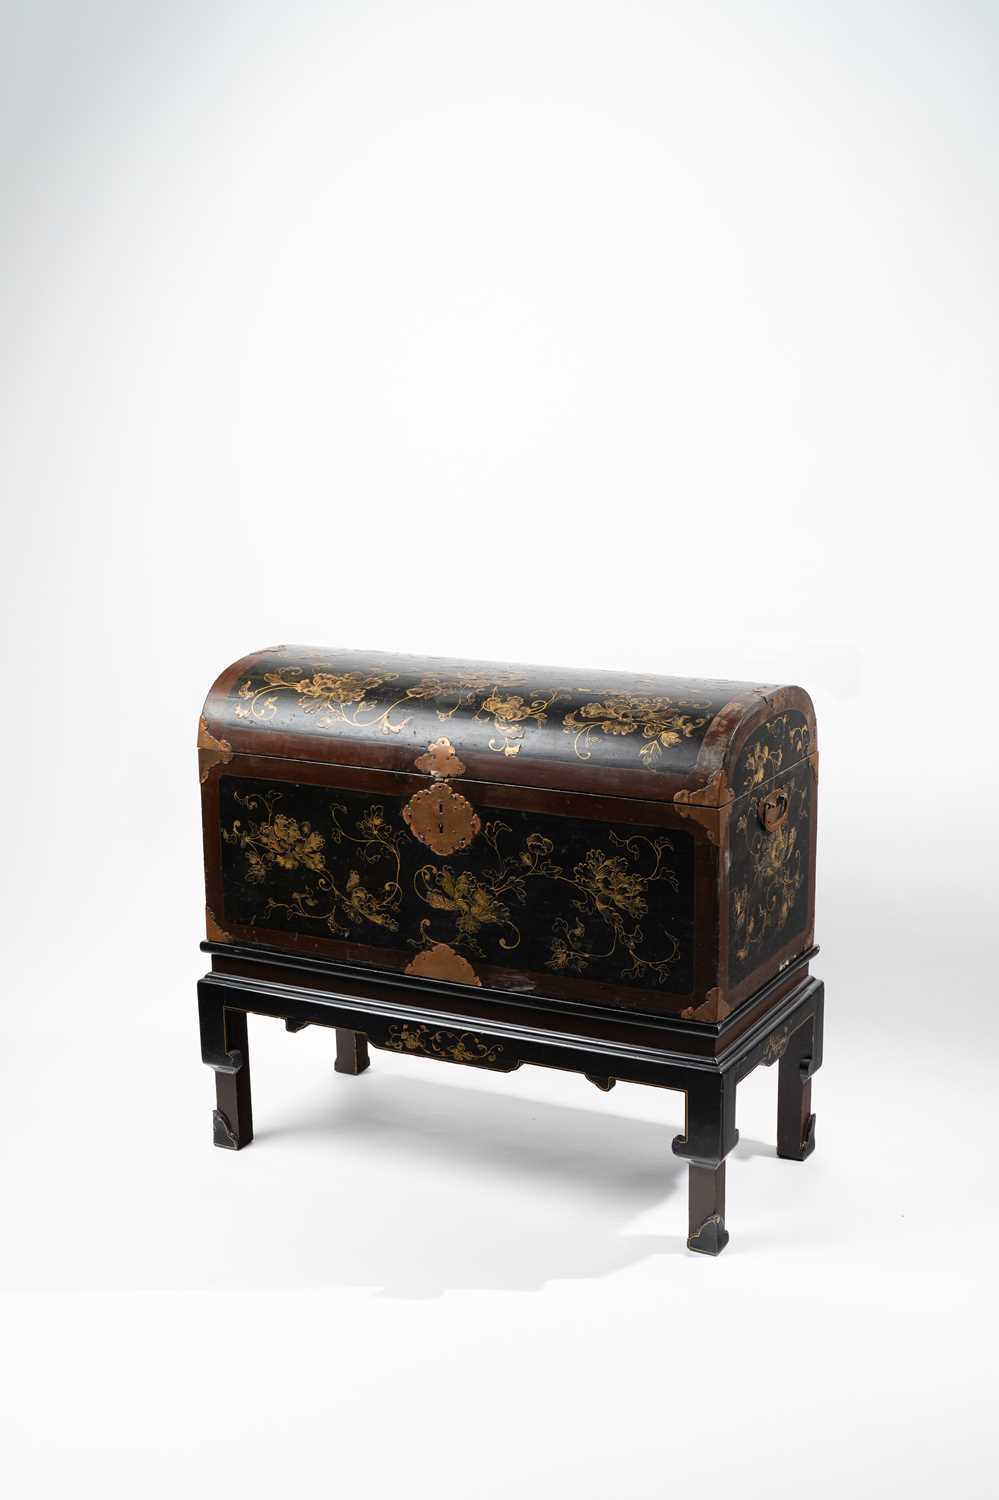 A LARGE JAPANESE GOLD AND BLACK LACQUER COFFER EDO PERIOD, 1680-1730 For the European market, of